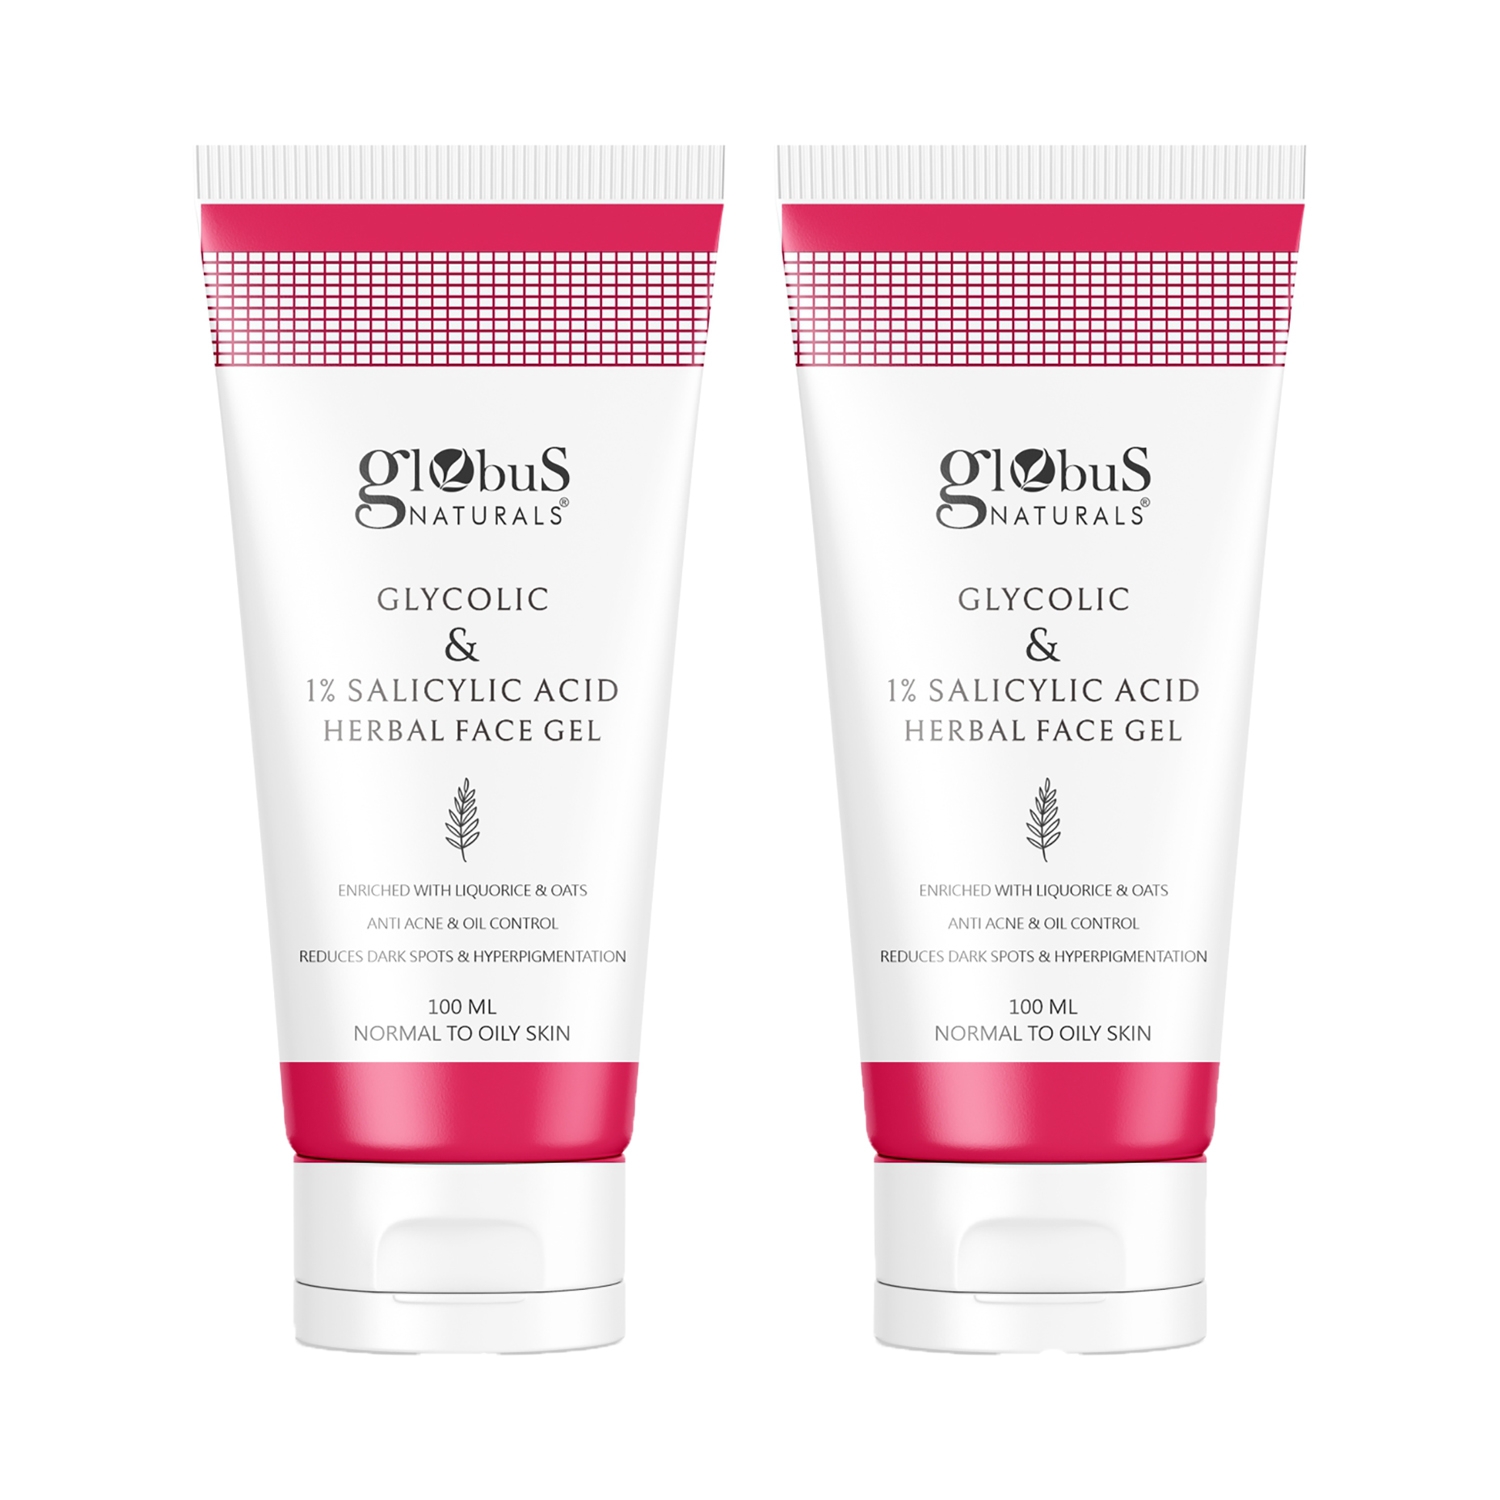 Globus Naturals | Globus Naturals Glycolic & 1% Salicylic Acid Herbal Anti Acne Face Gel Enriched With Oats (2 Pcs)